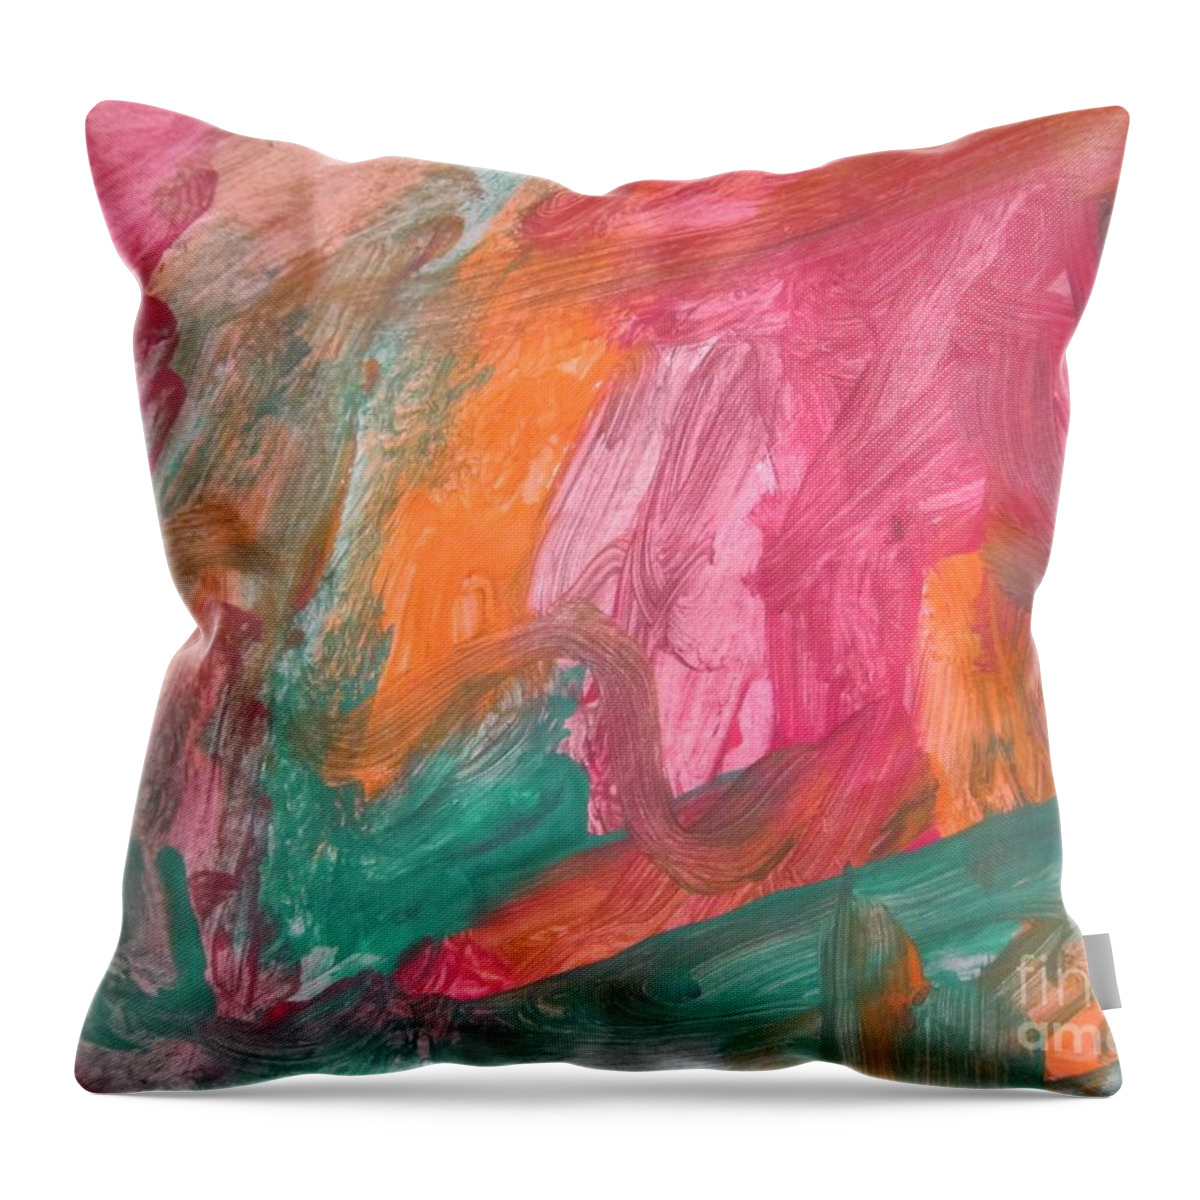 Art Throw Pillow featuring the sculpture Untitled 119 Original Painting by Iyanuoluwa Adeshina